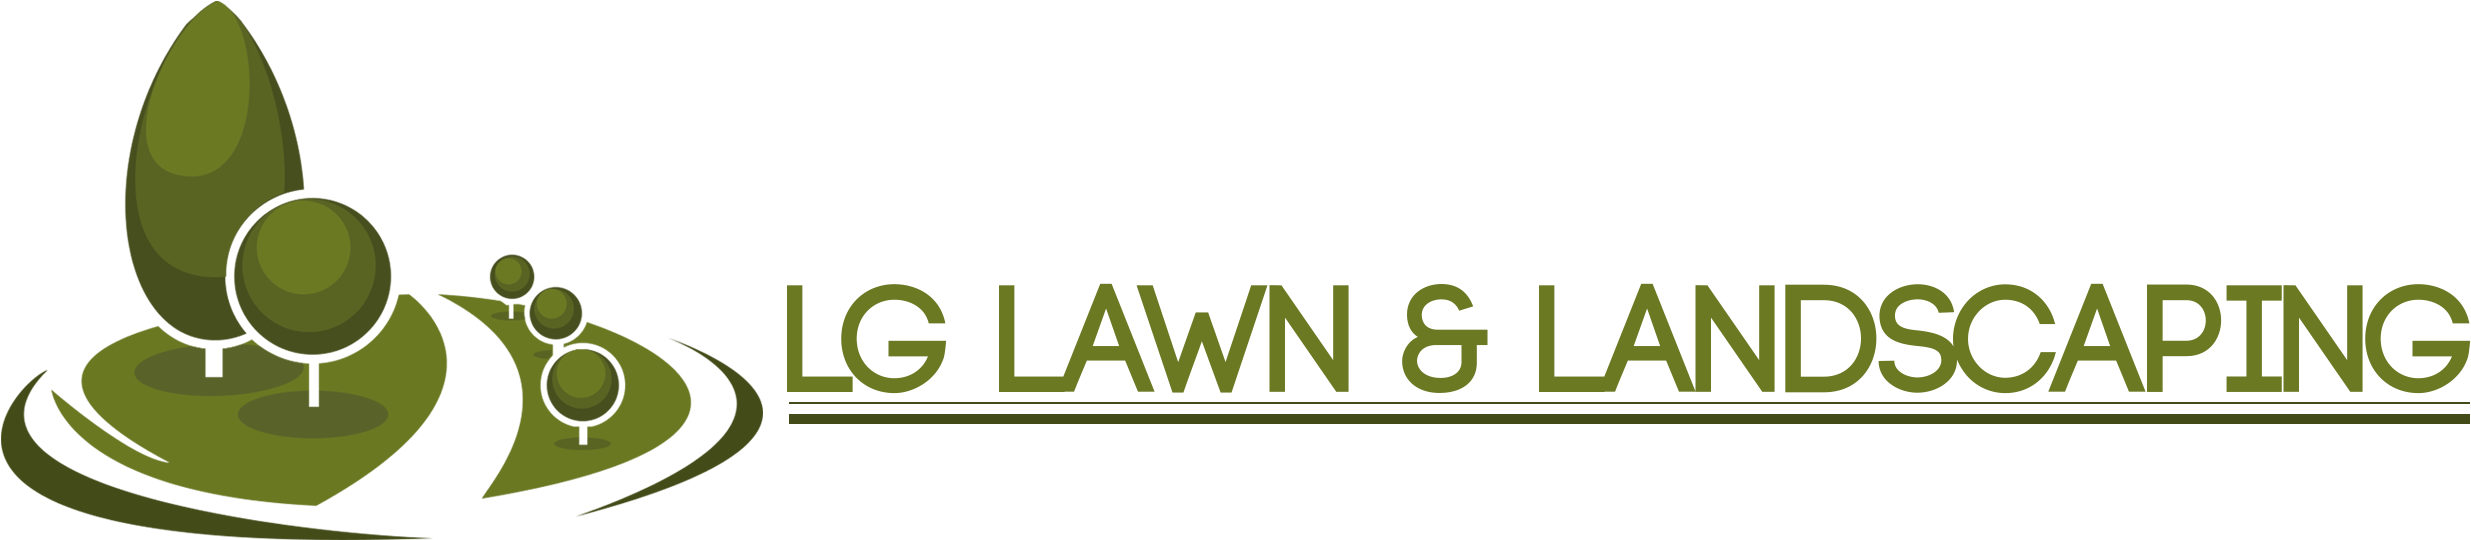 Lg Lawn & Landscaping Llc - Graphic Design (2488x577), Png Download